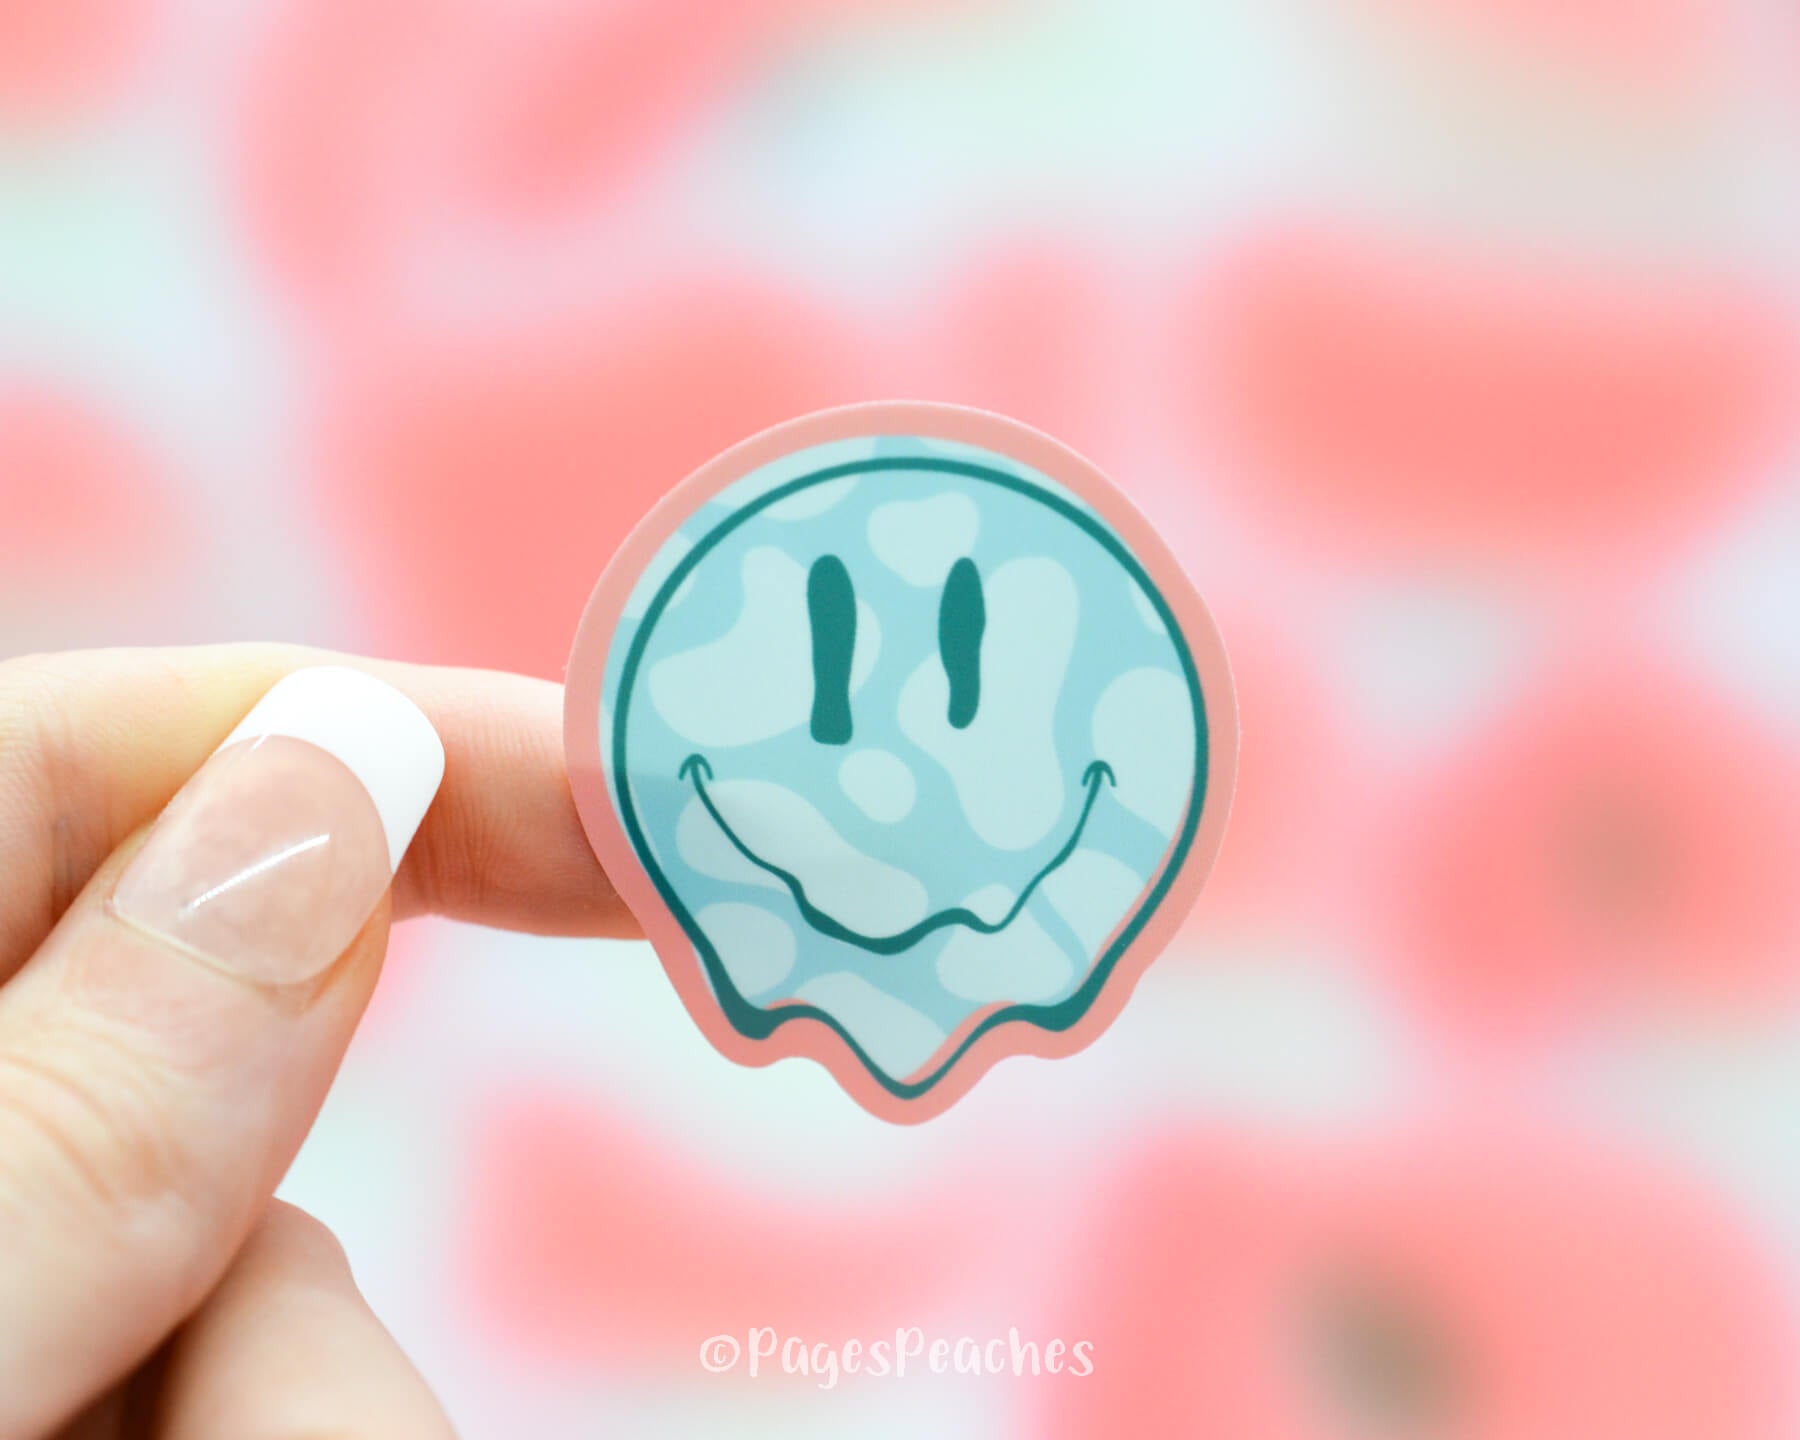 Sticker of a blue melting smiley face with cow print on a pink background